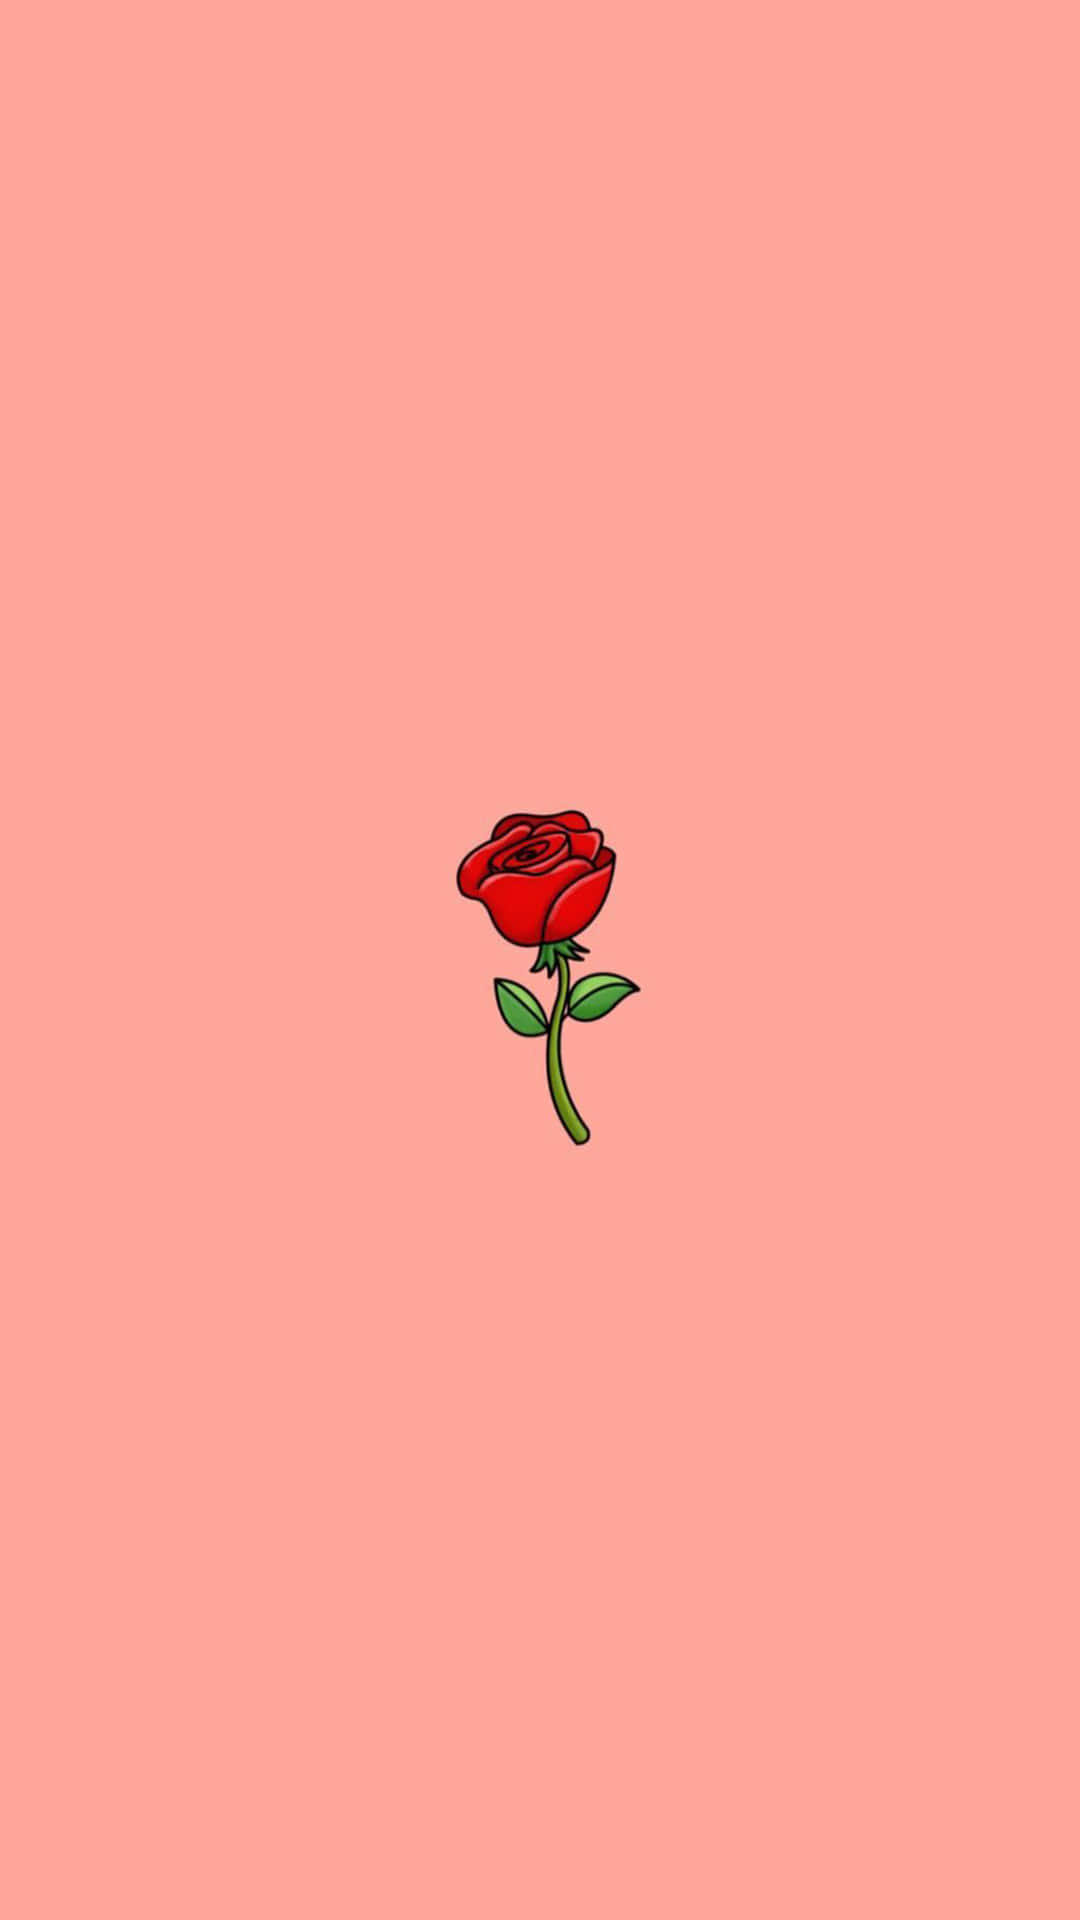 Download Aesthetic Rose 1080 X 1920 Background | Wallpapers.com